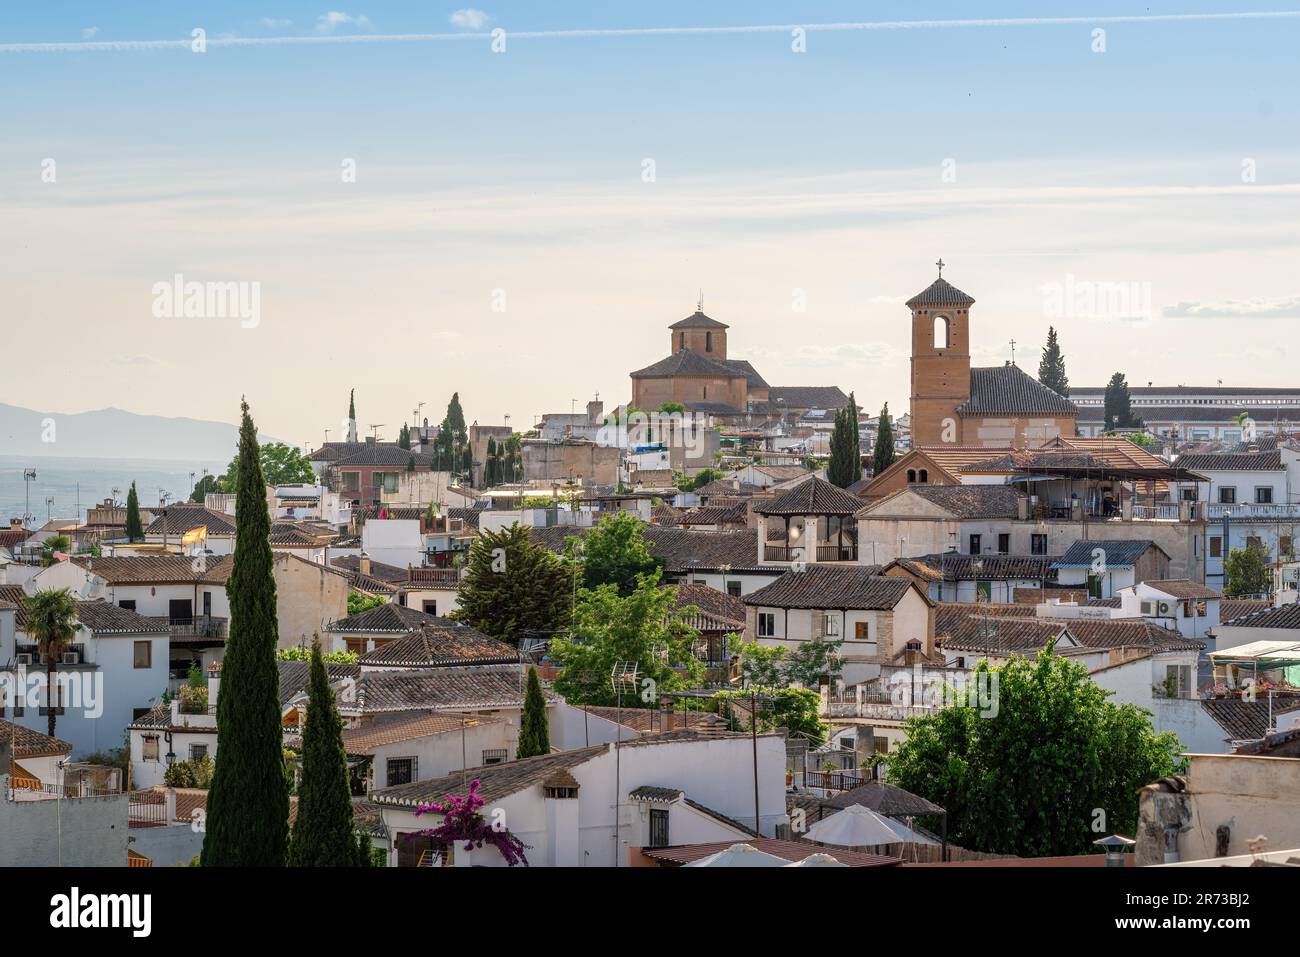 Aerial view of Church of San Bartolome and Church of San Cristobal - Granada, Andalusia, Spain Stock Photo